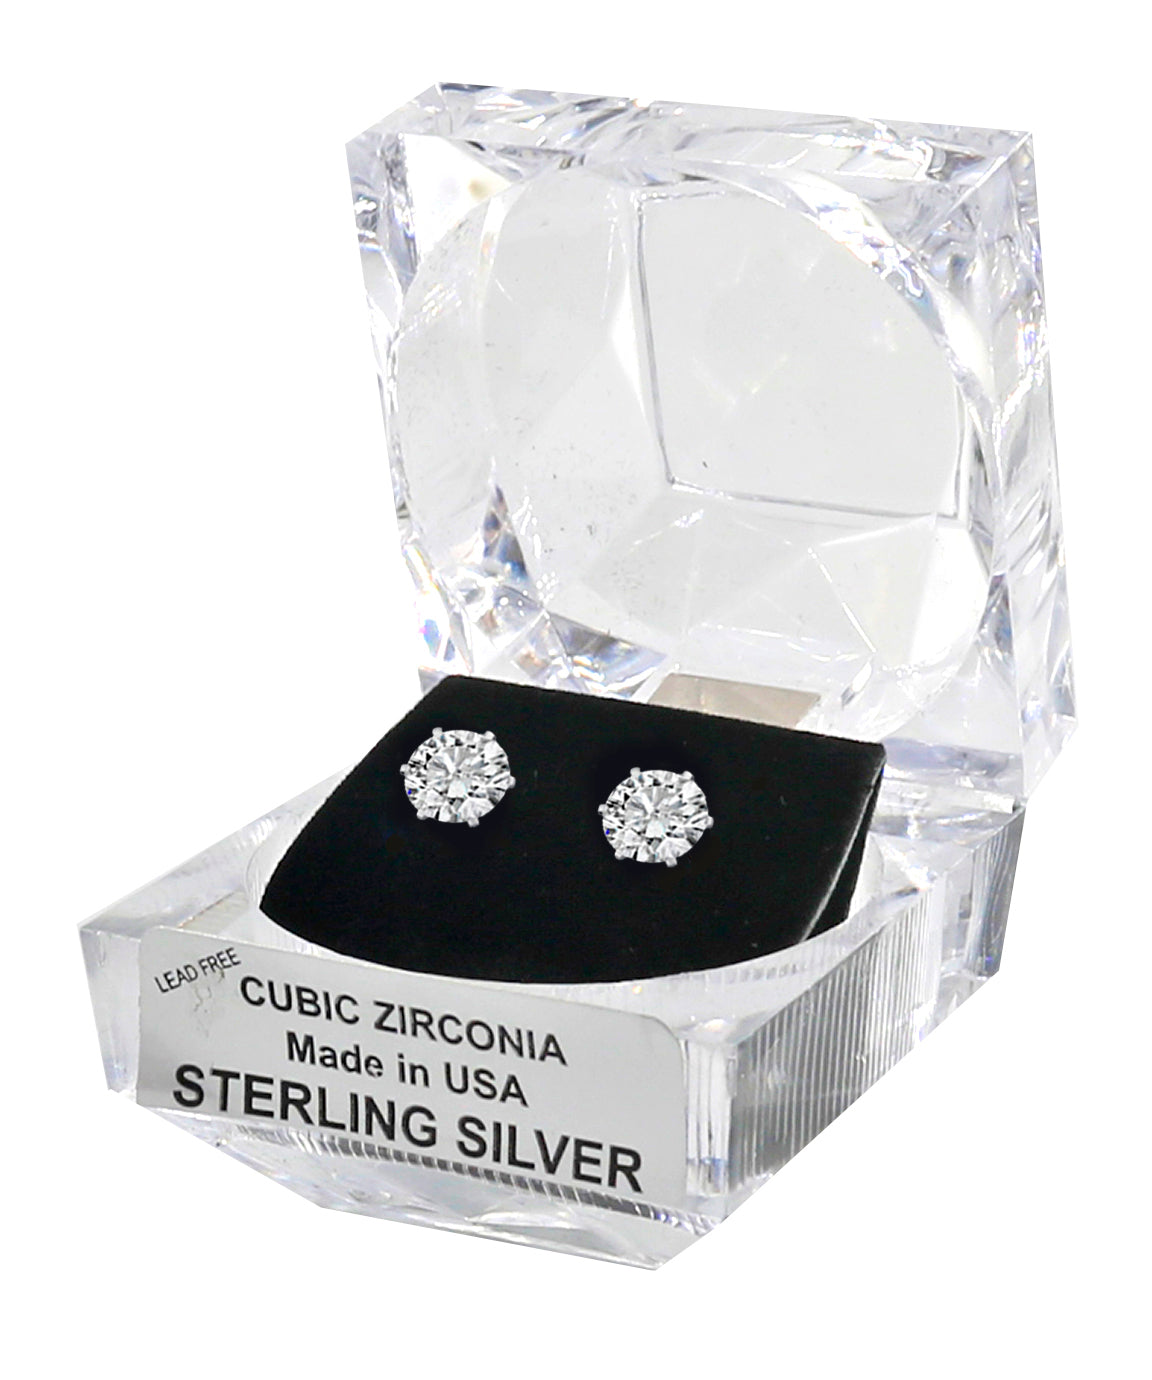 Sterling Silver Round Cut Cubic Zirconia Earrings with Crystal Box 2 carat (6 1/2 MM)